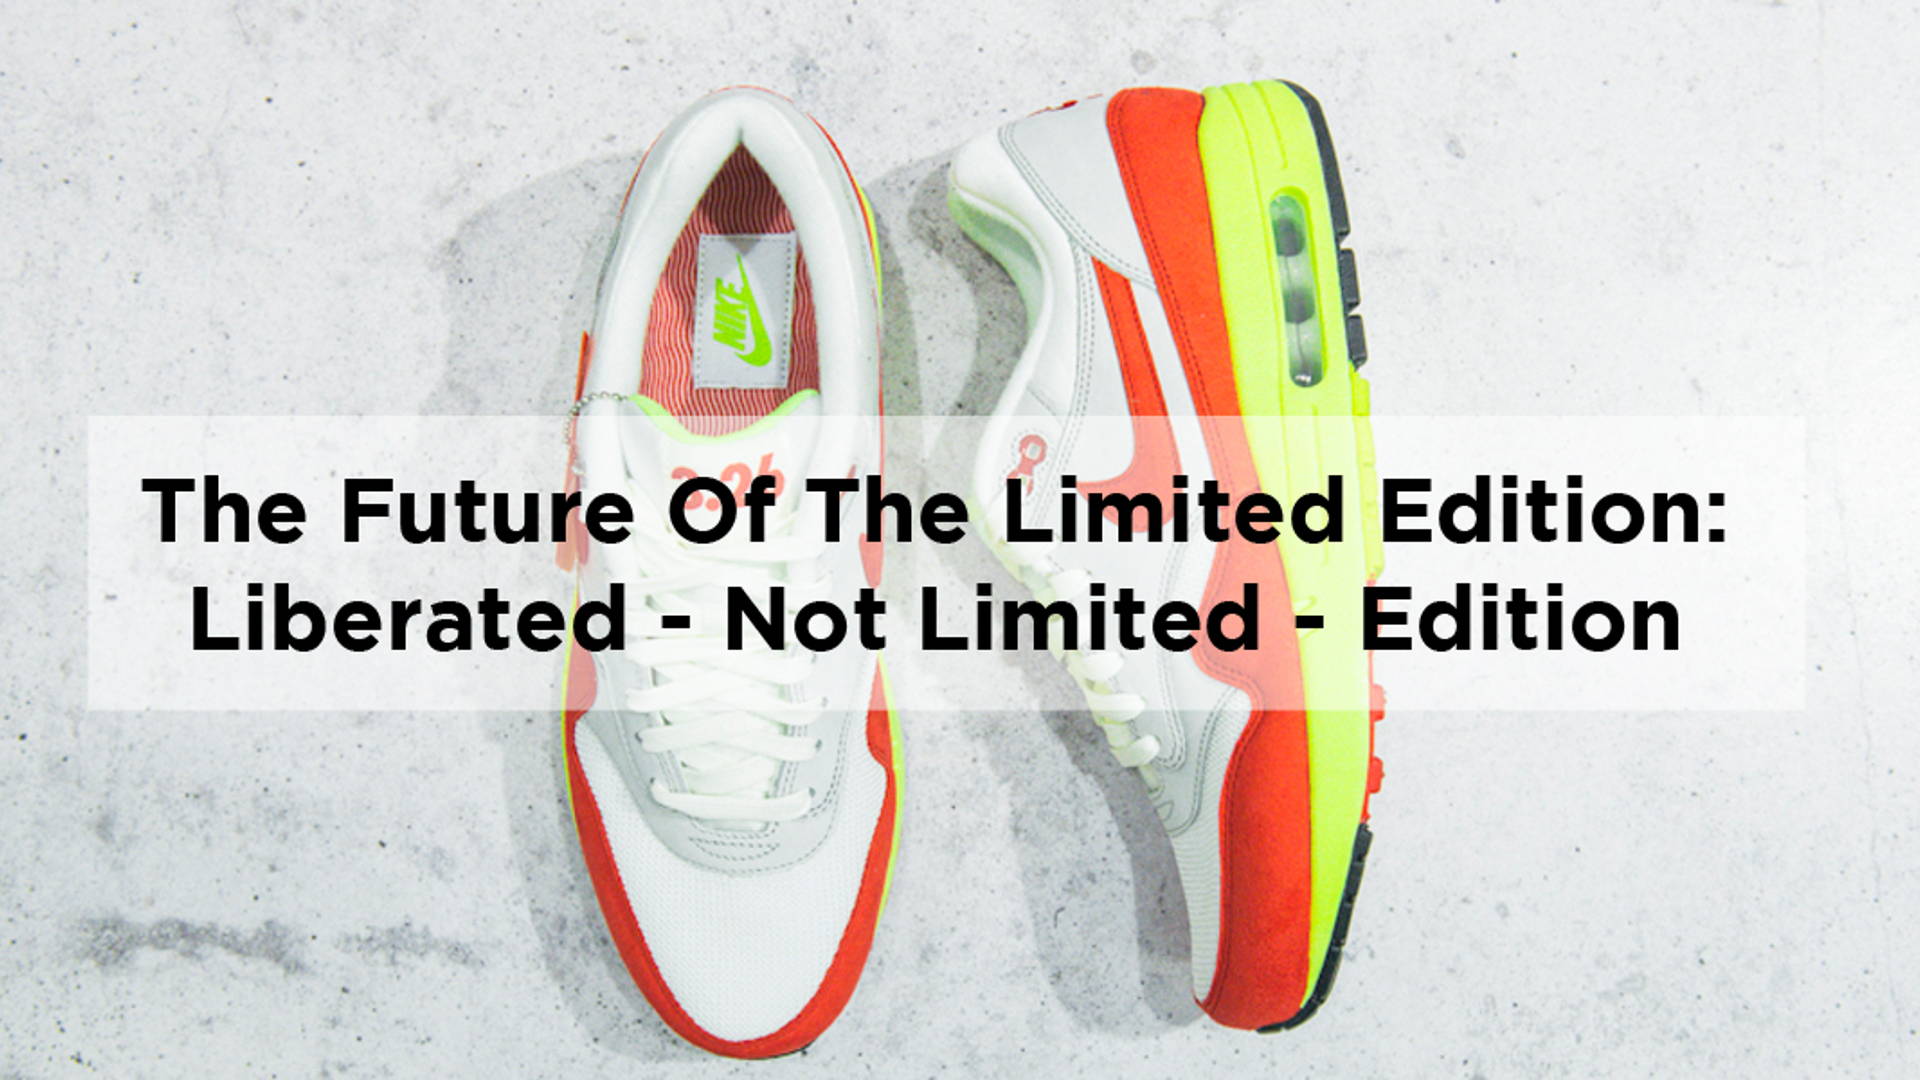 Featured image for The Future of the Limited Edition: Liberated - not limited - edition